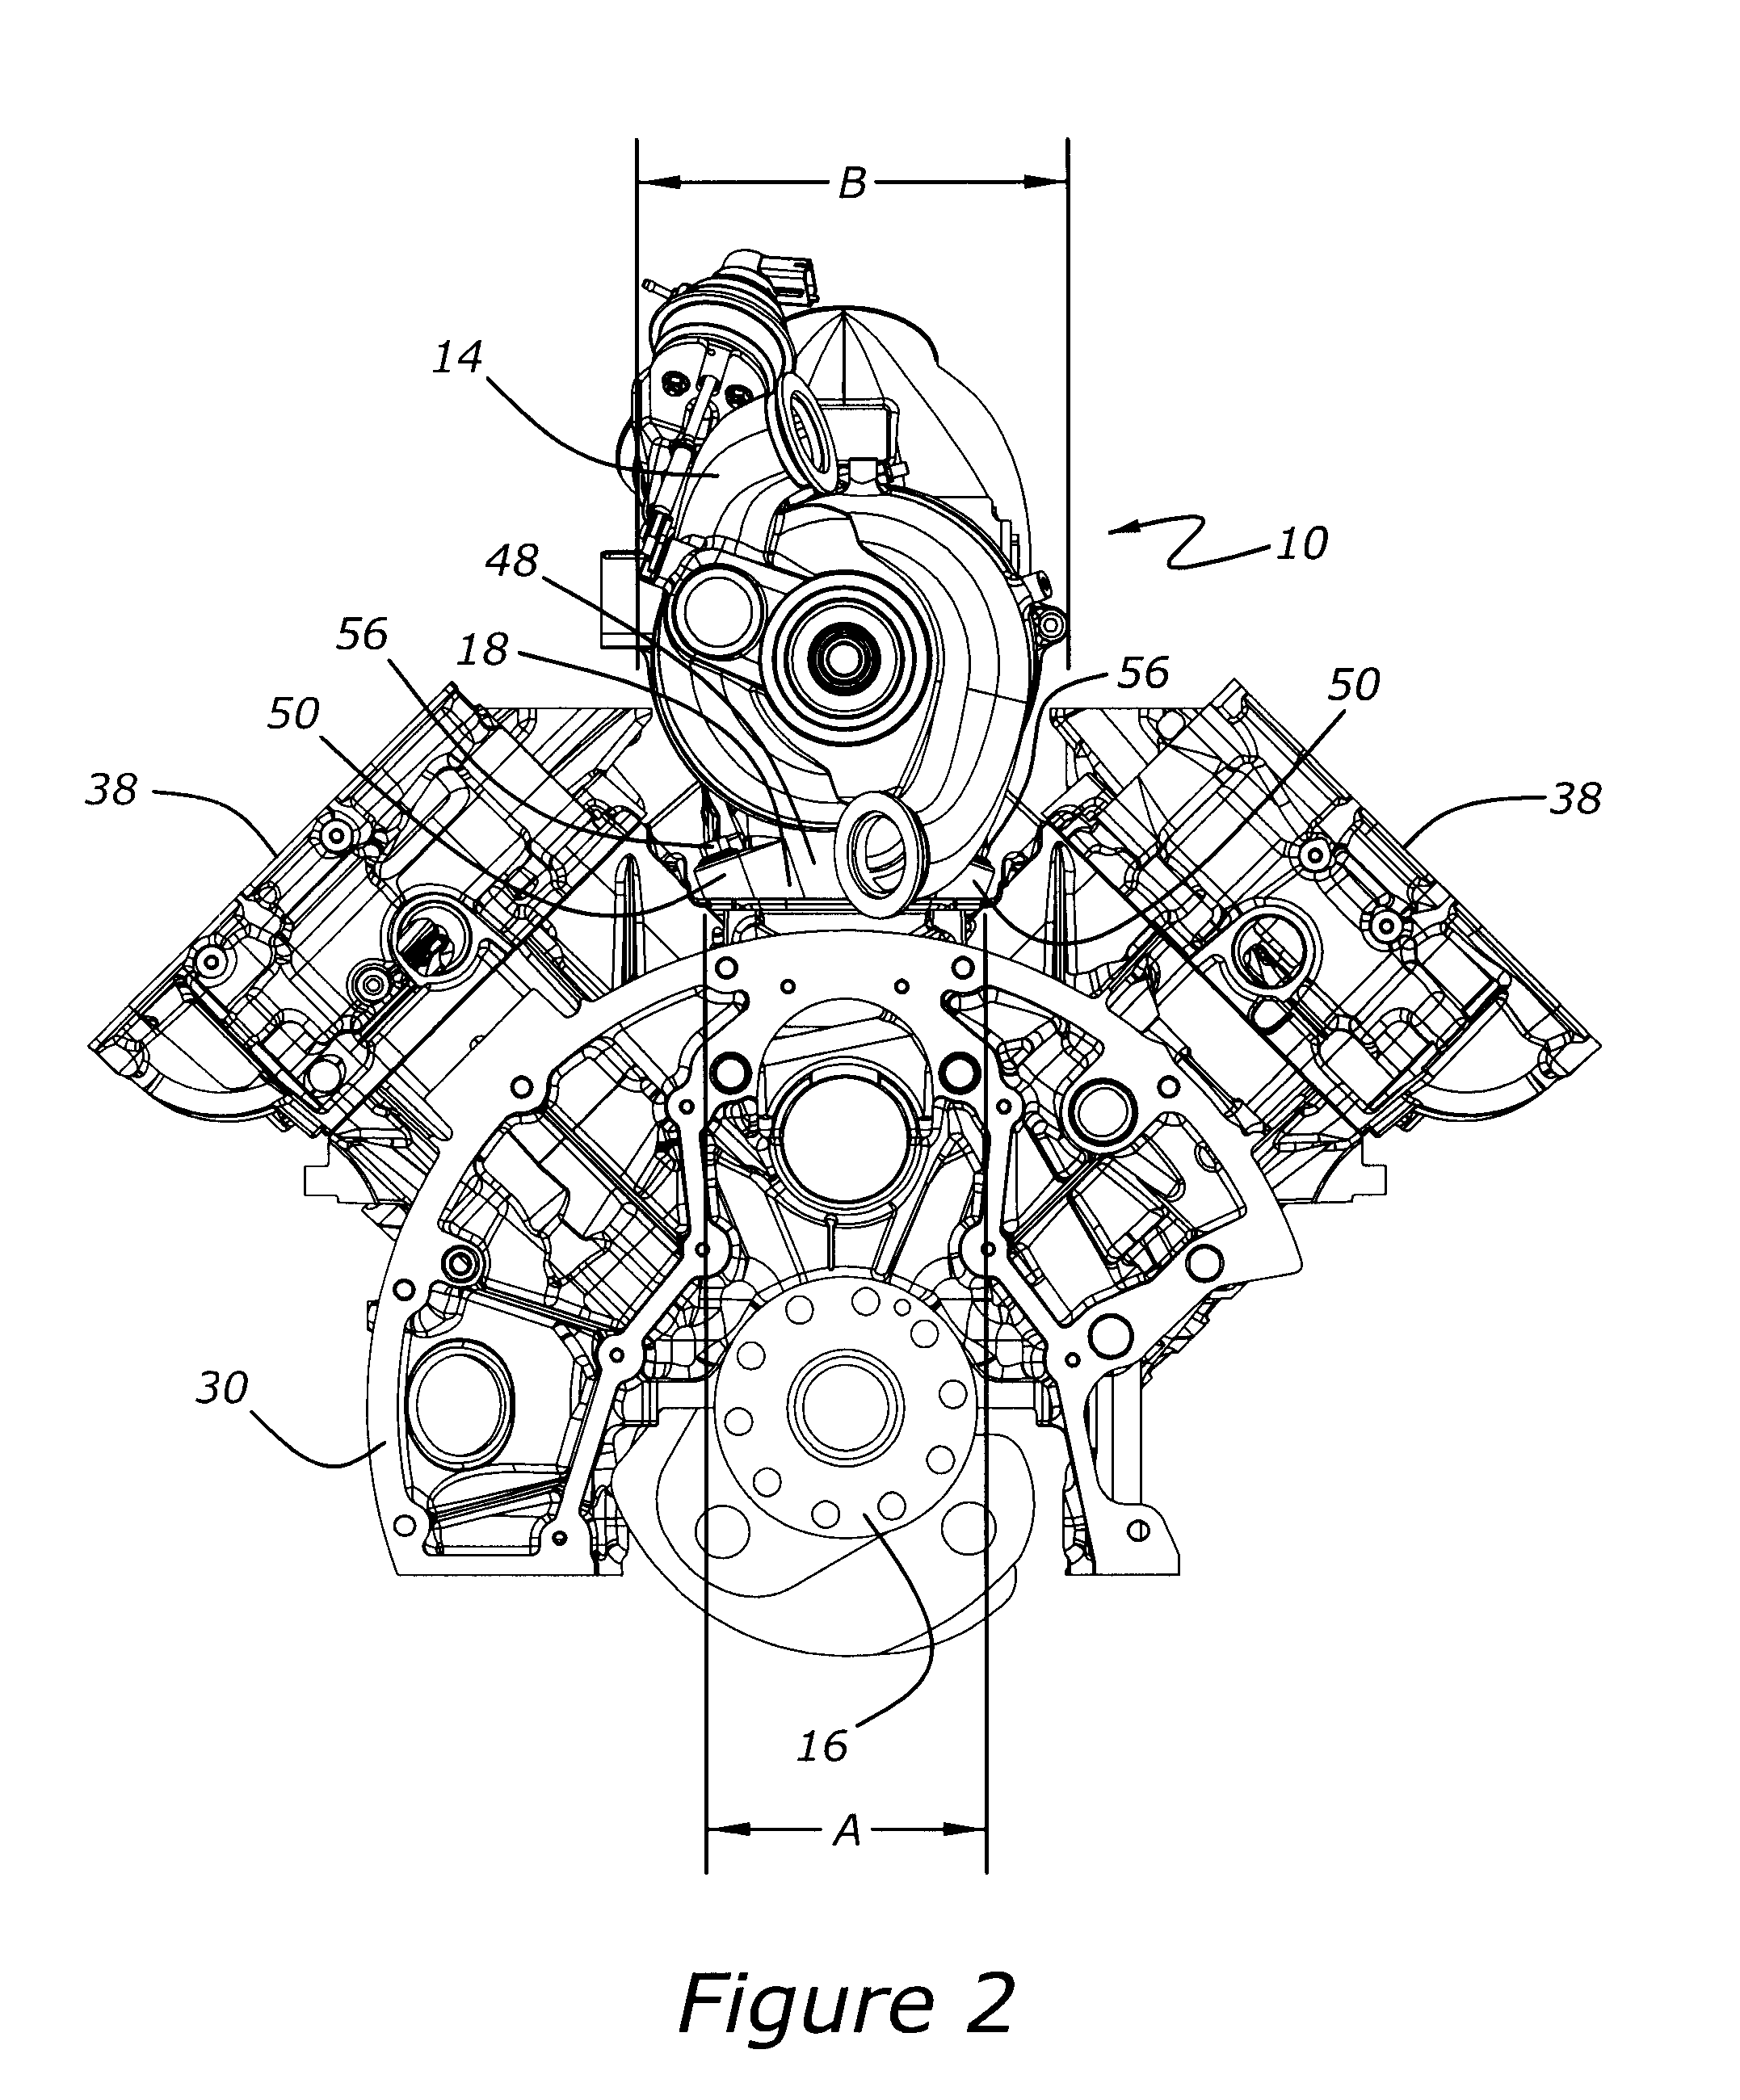 Turbocharger system for internal combustion engine with internal isolated turbocharger oil drainback passage